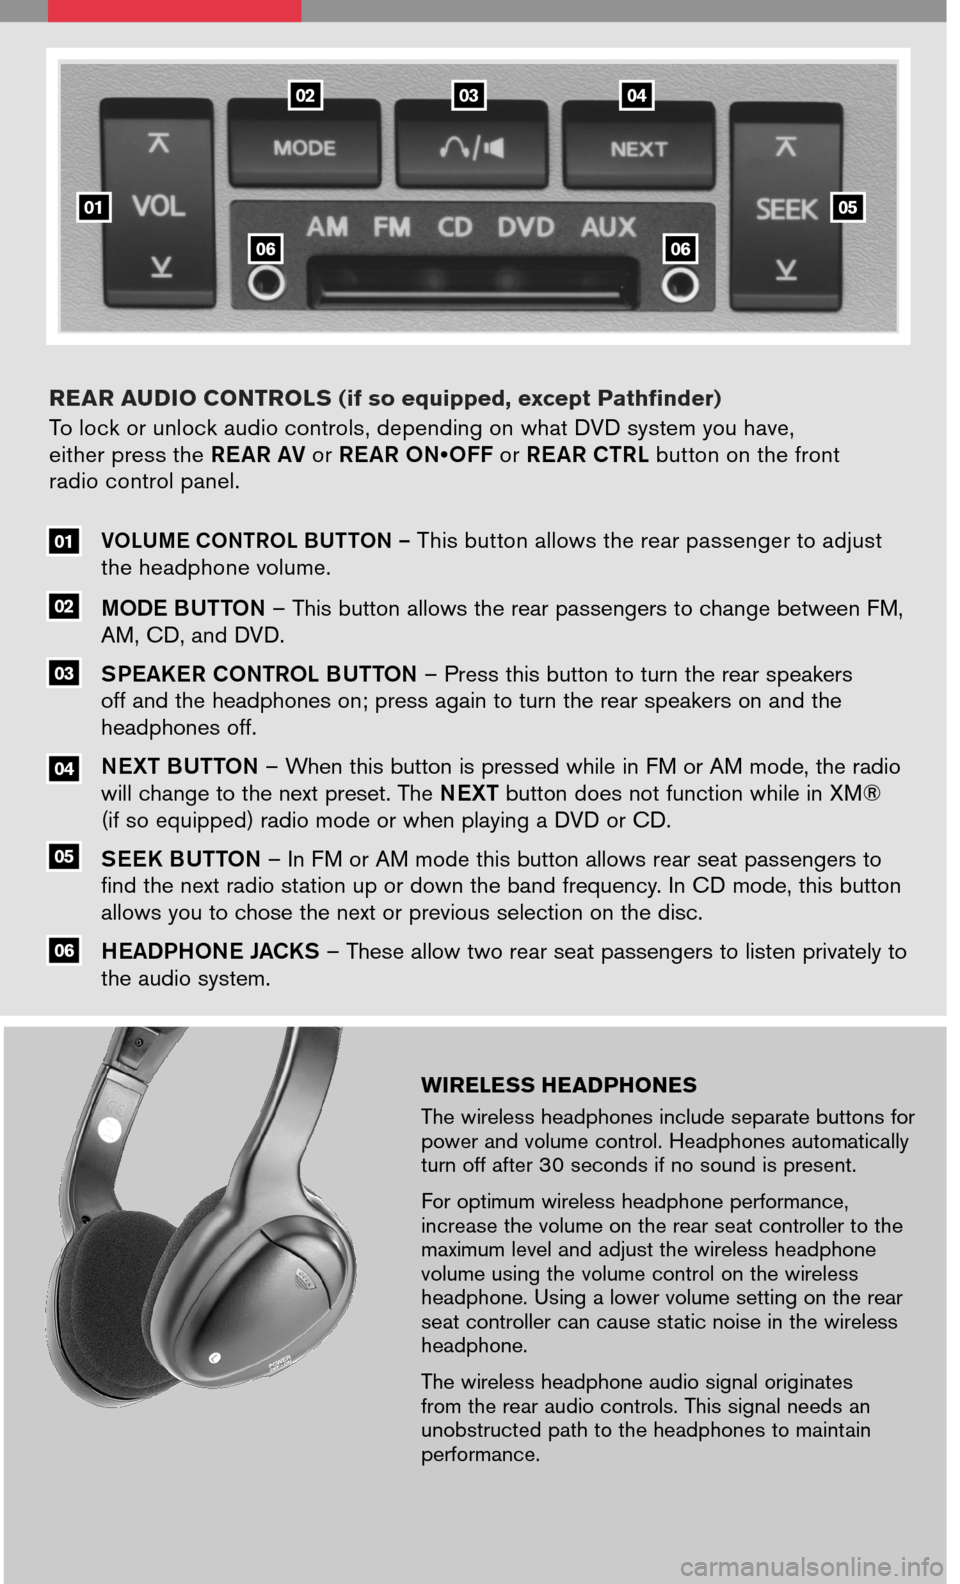 NISSAN TITAN 2008 1.G Entertainment Syst 
WIRELESS HEADPHONES
The wireless headphones include separate buttons for power and volume control. Headphones automatically turn off after 30 seconds if no sound is present.
For optimum wireless head